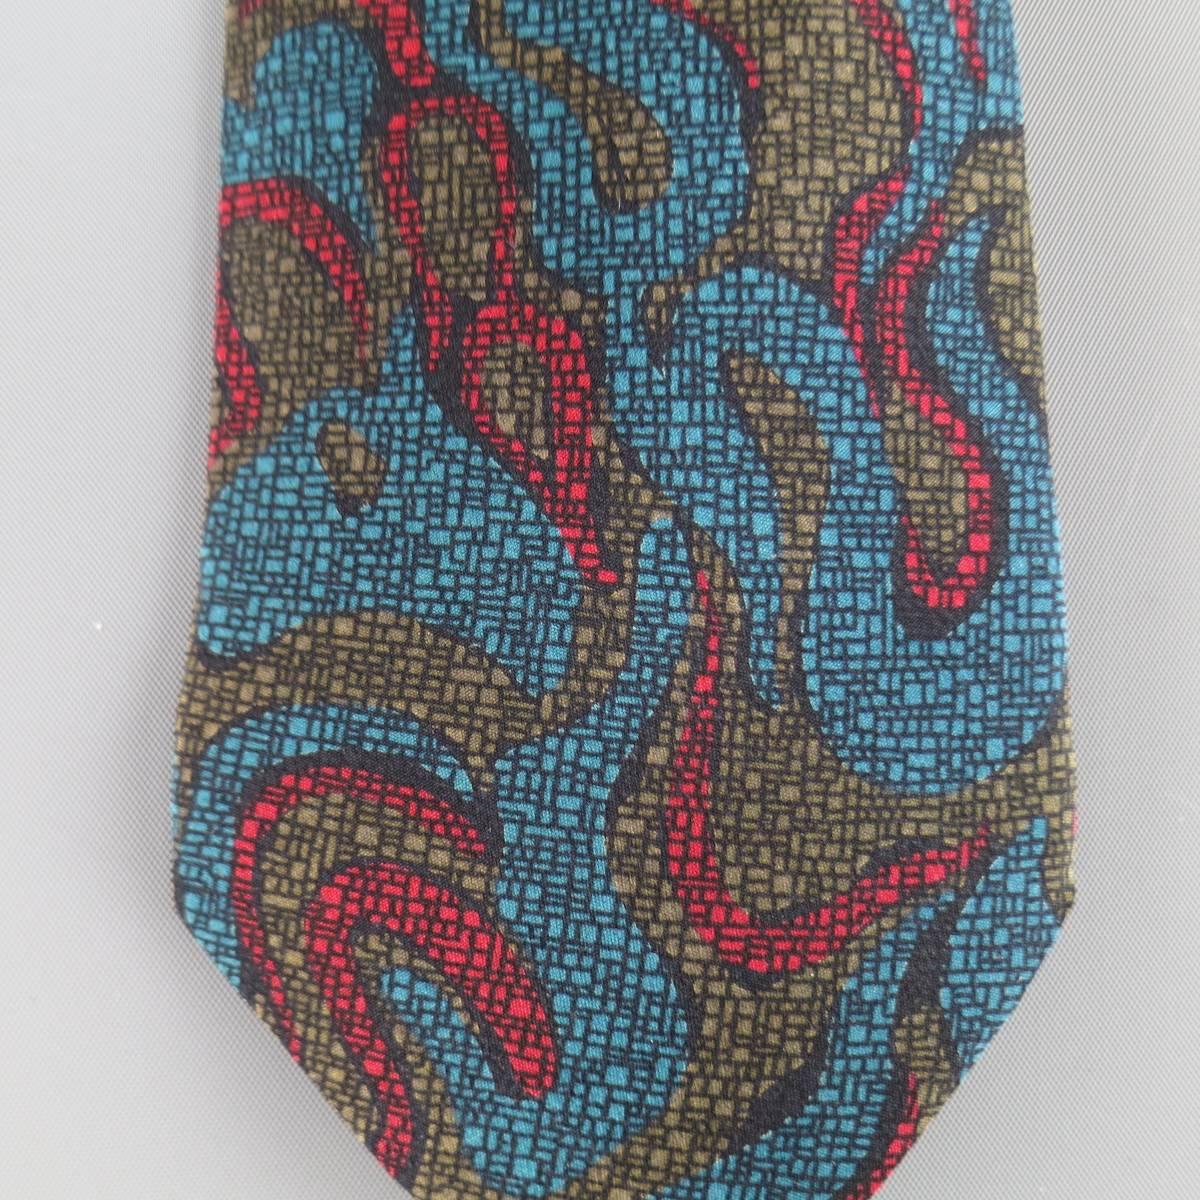 GIANNI VERSACE Vintage Tie consists of 100% silk material in a teal color tone. Designed in a modern abstract style, wave pattern with graphic print in red, taupe and teal accents. Comes with original boxing. Made in Italy.
 
Excellent Pre-Owned